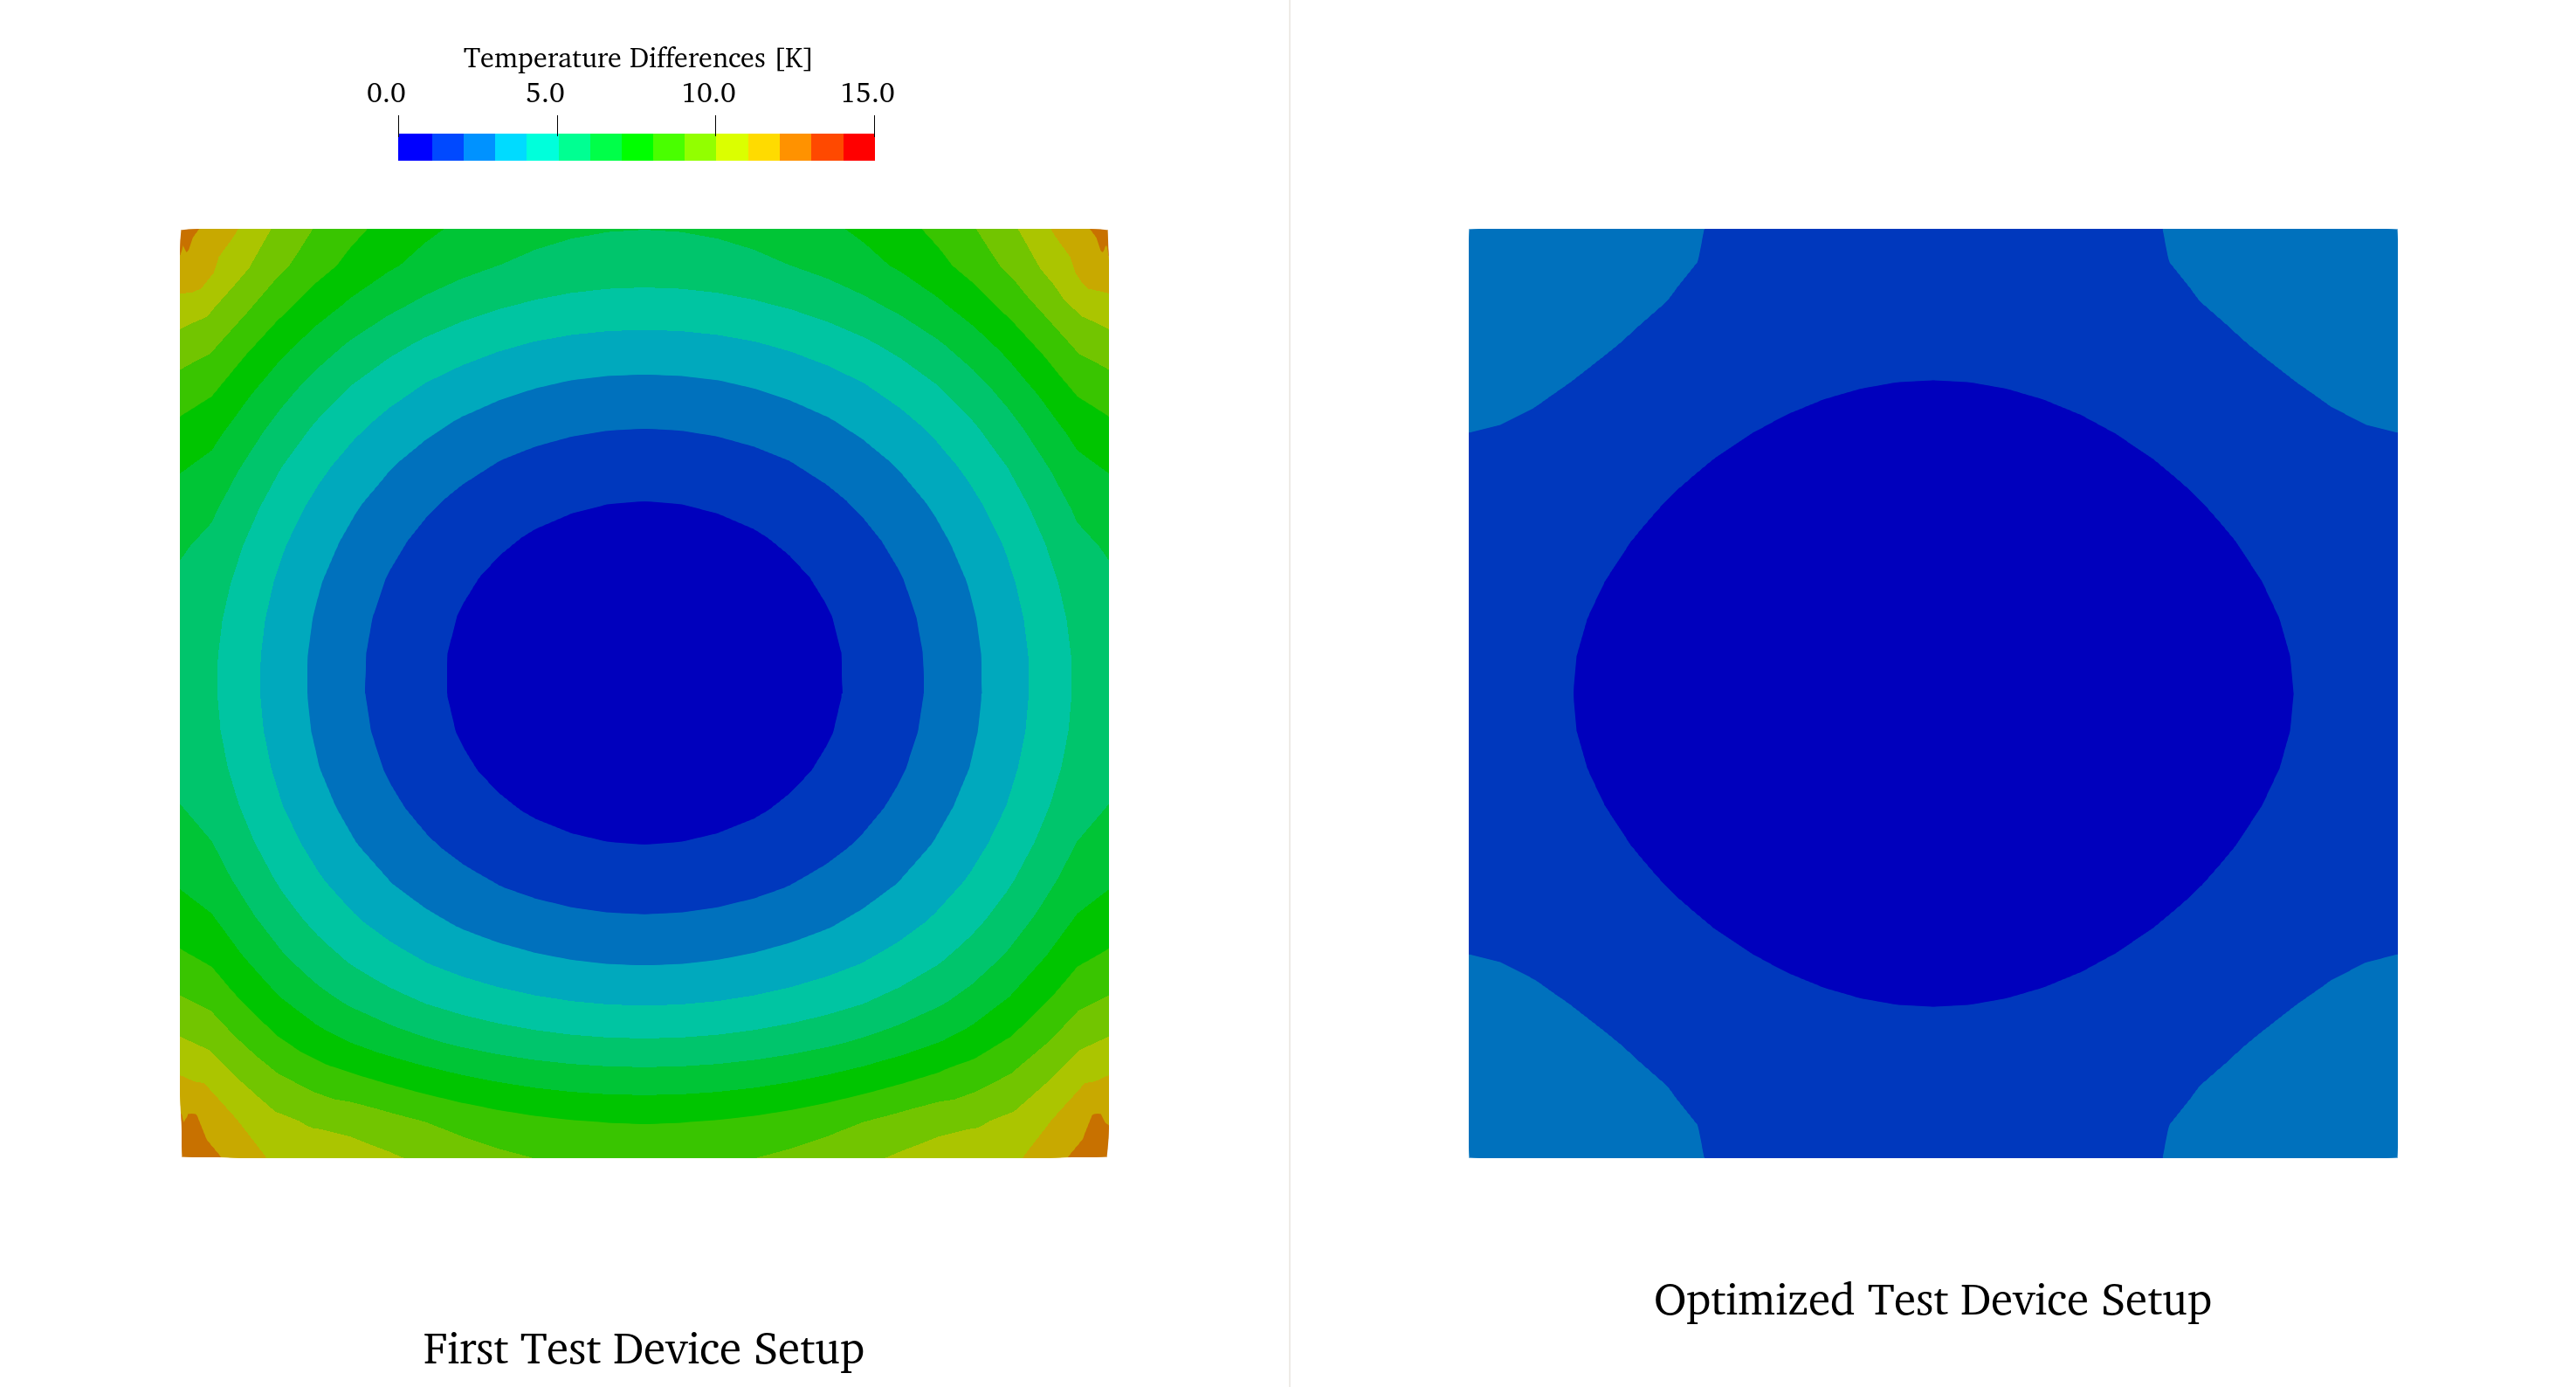 Distribution before and after the test device optimization